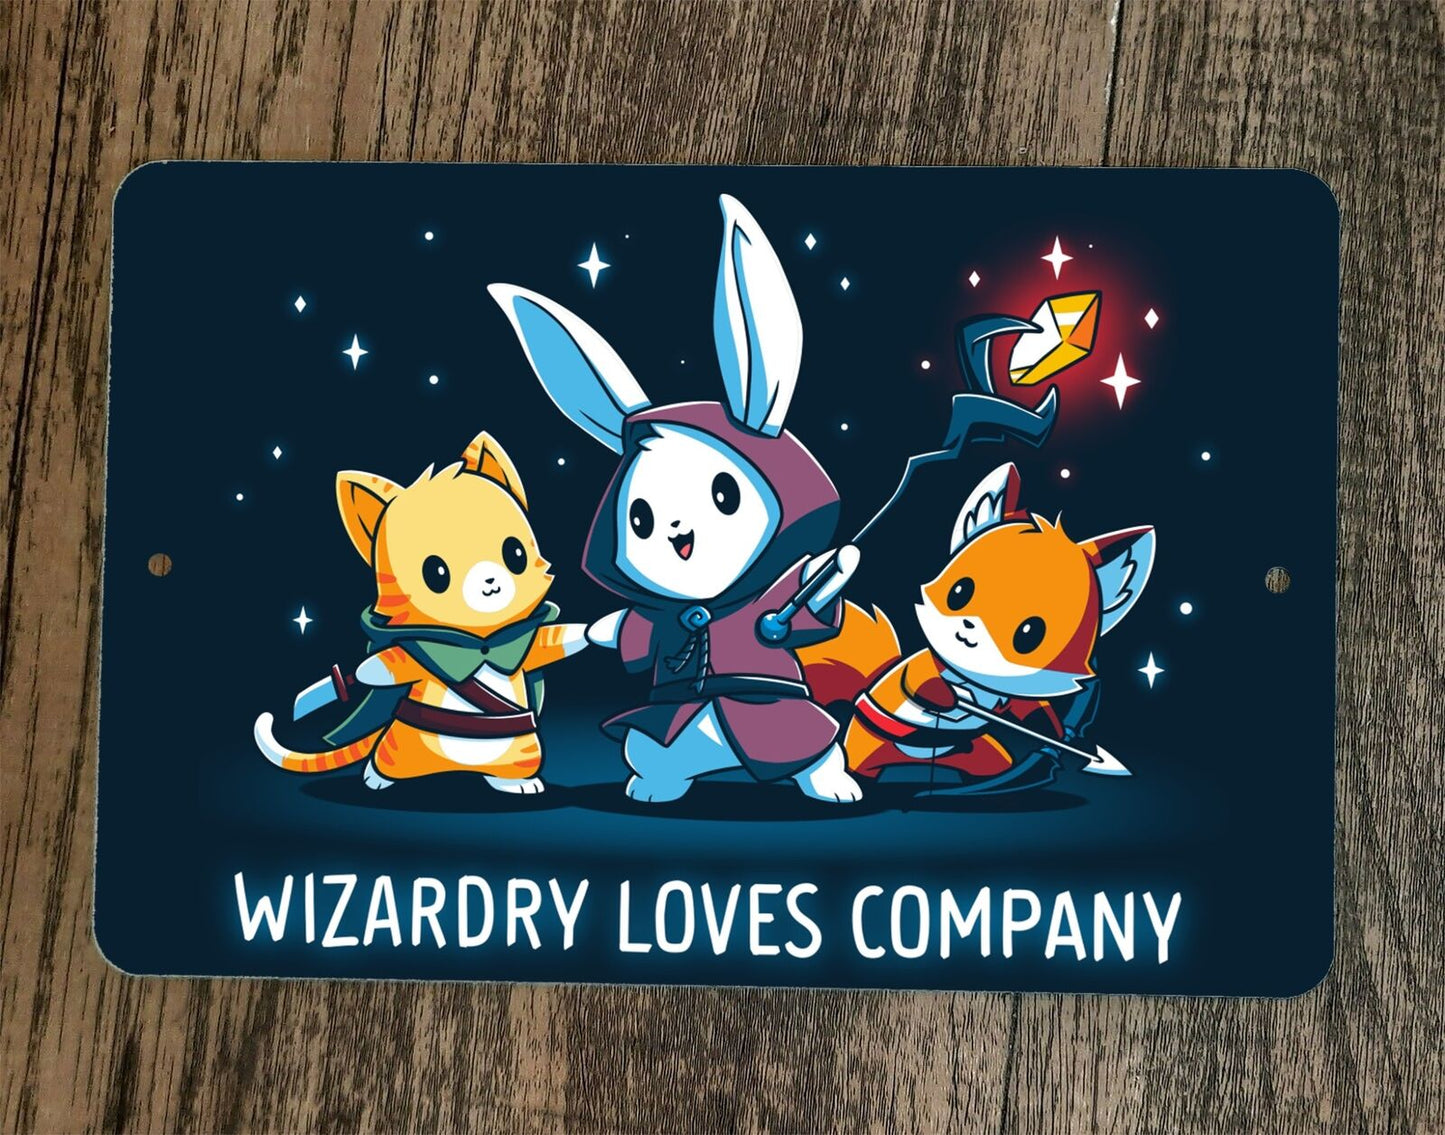 Wizardy Loves Company RPG Video Gamer Animals 8x12 Metal Wall Sign Poster